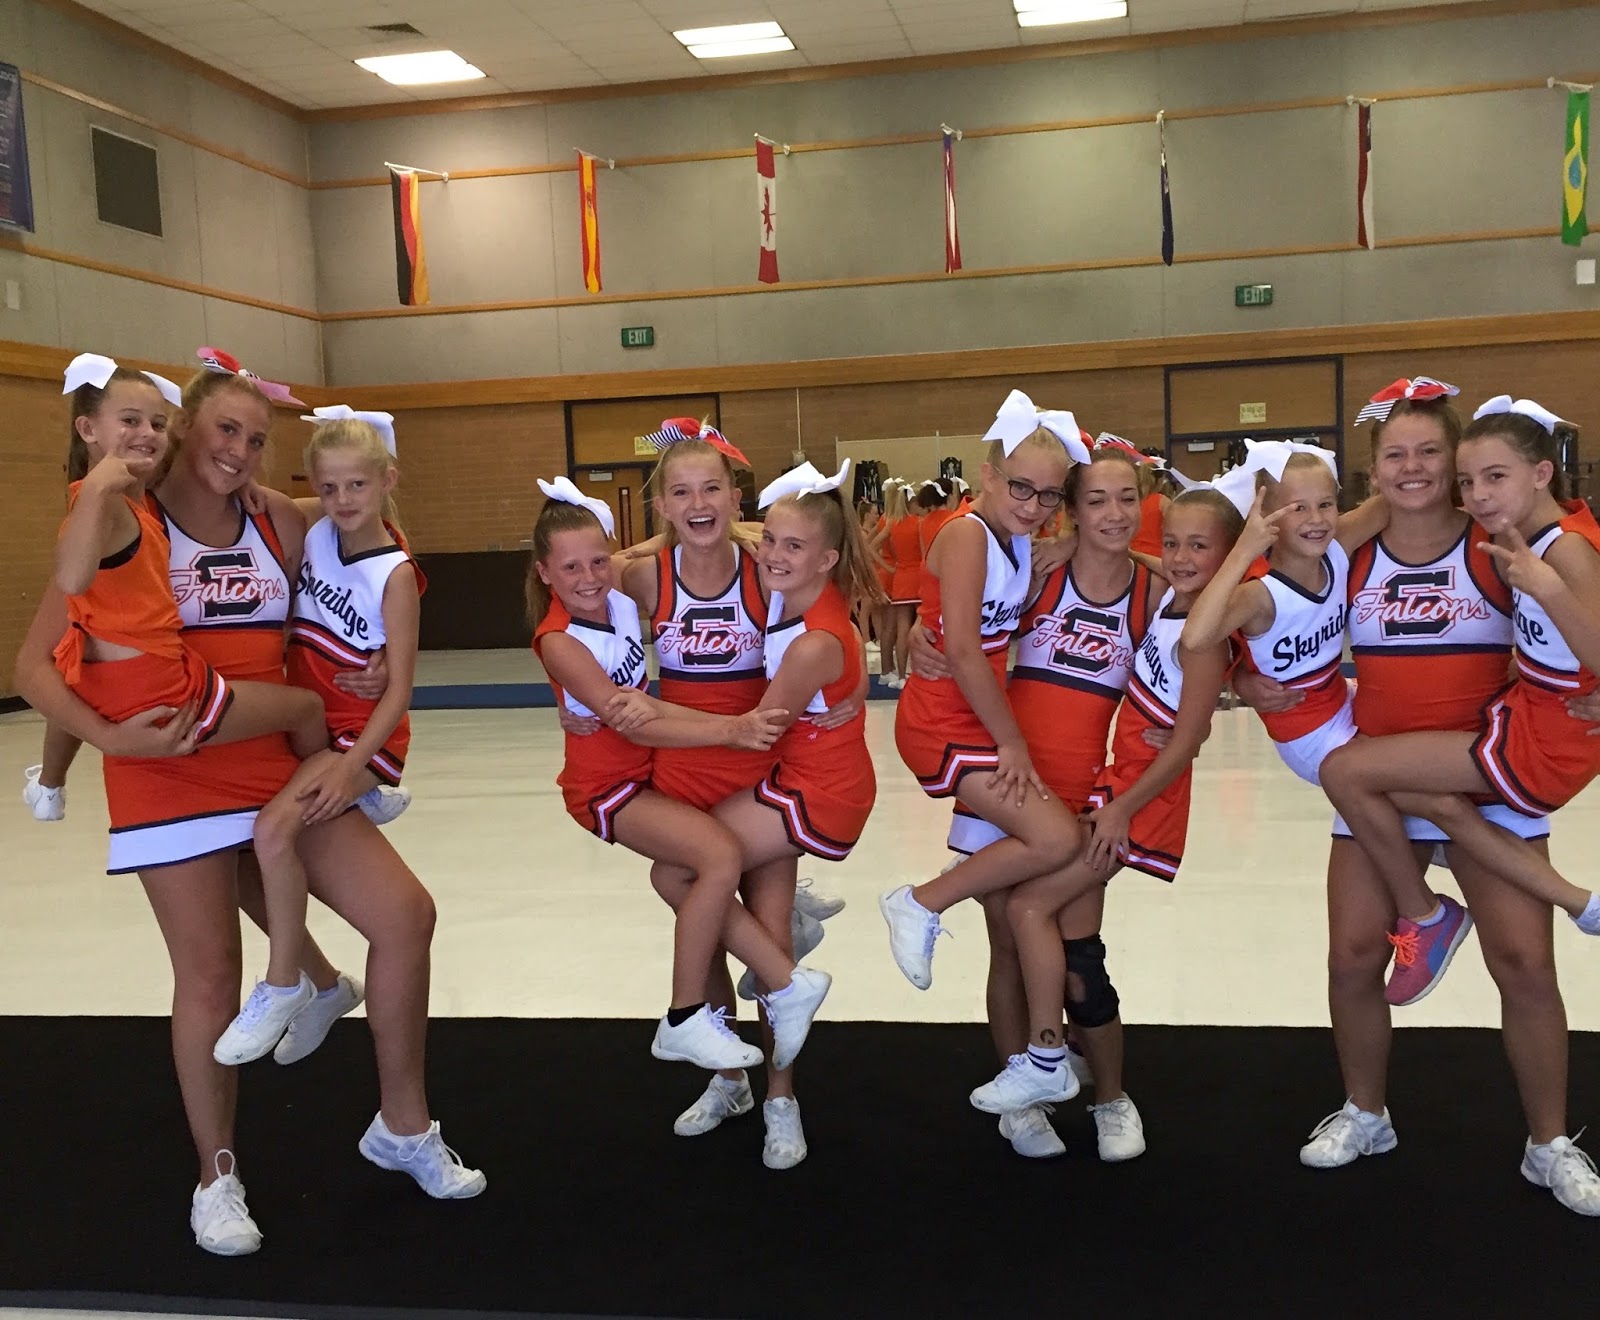 We have moved!: 2016-2017 Cheer Team